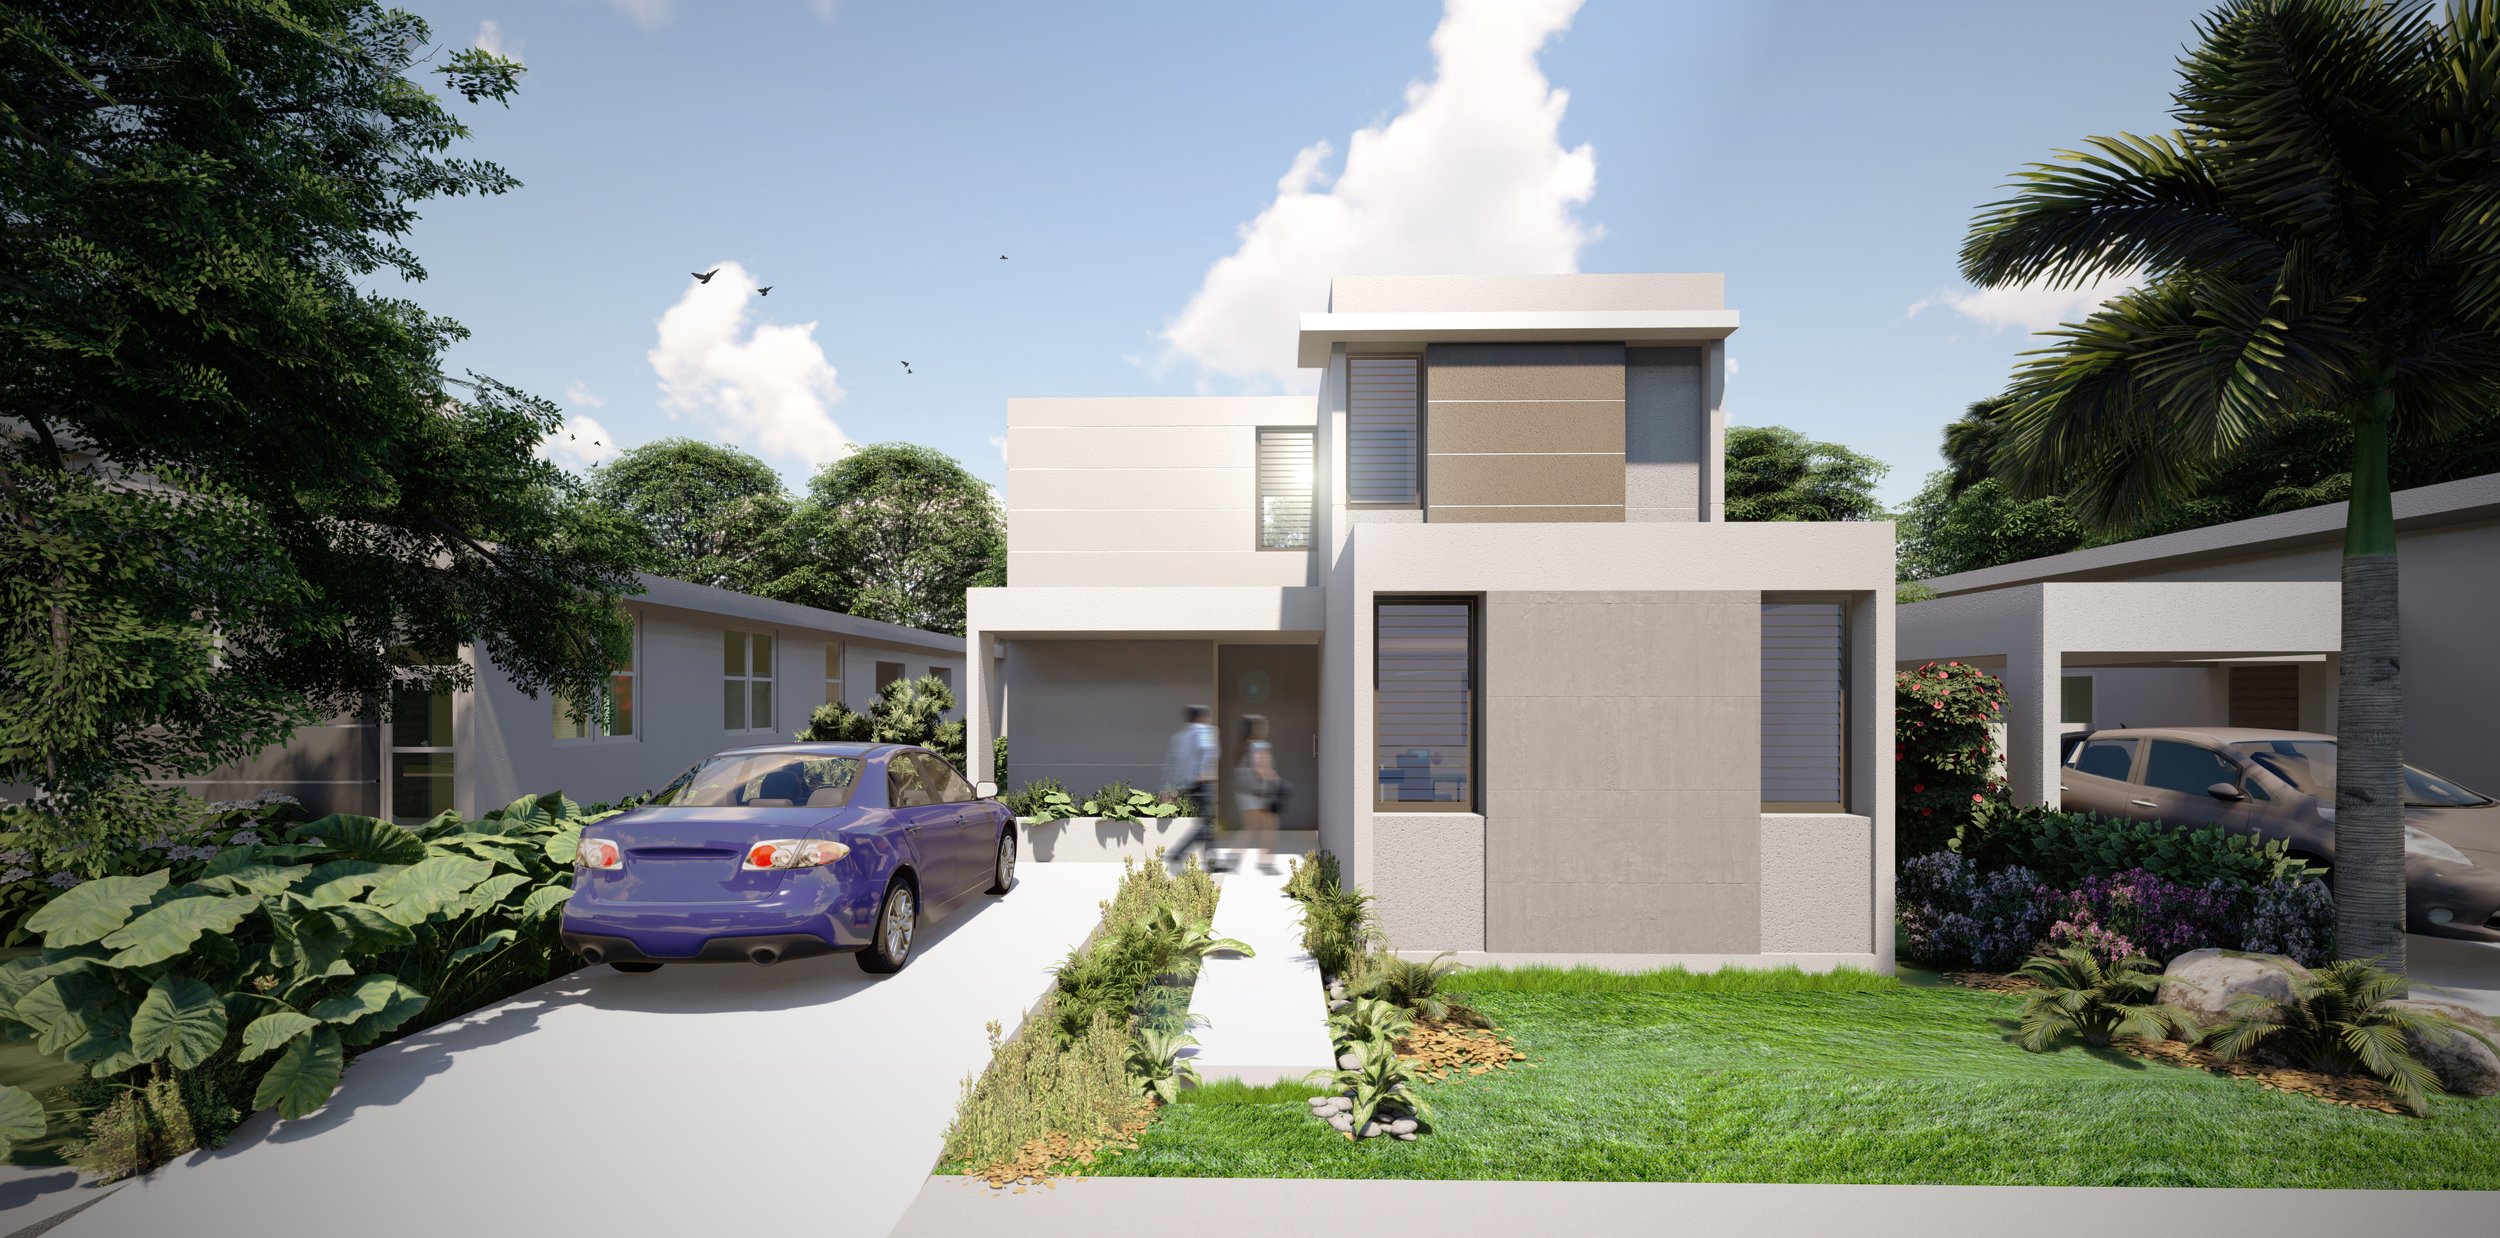  Conceptual rendering of an R3 house. 